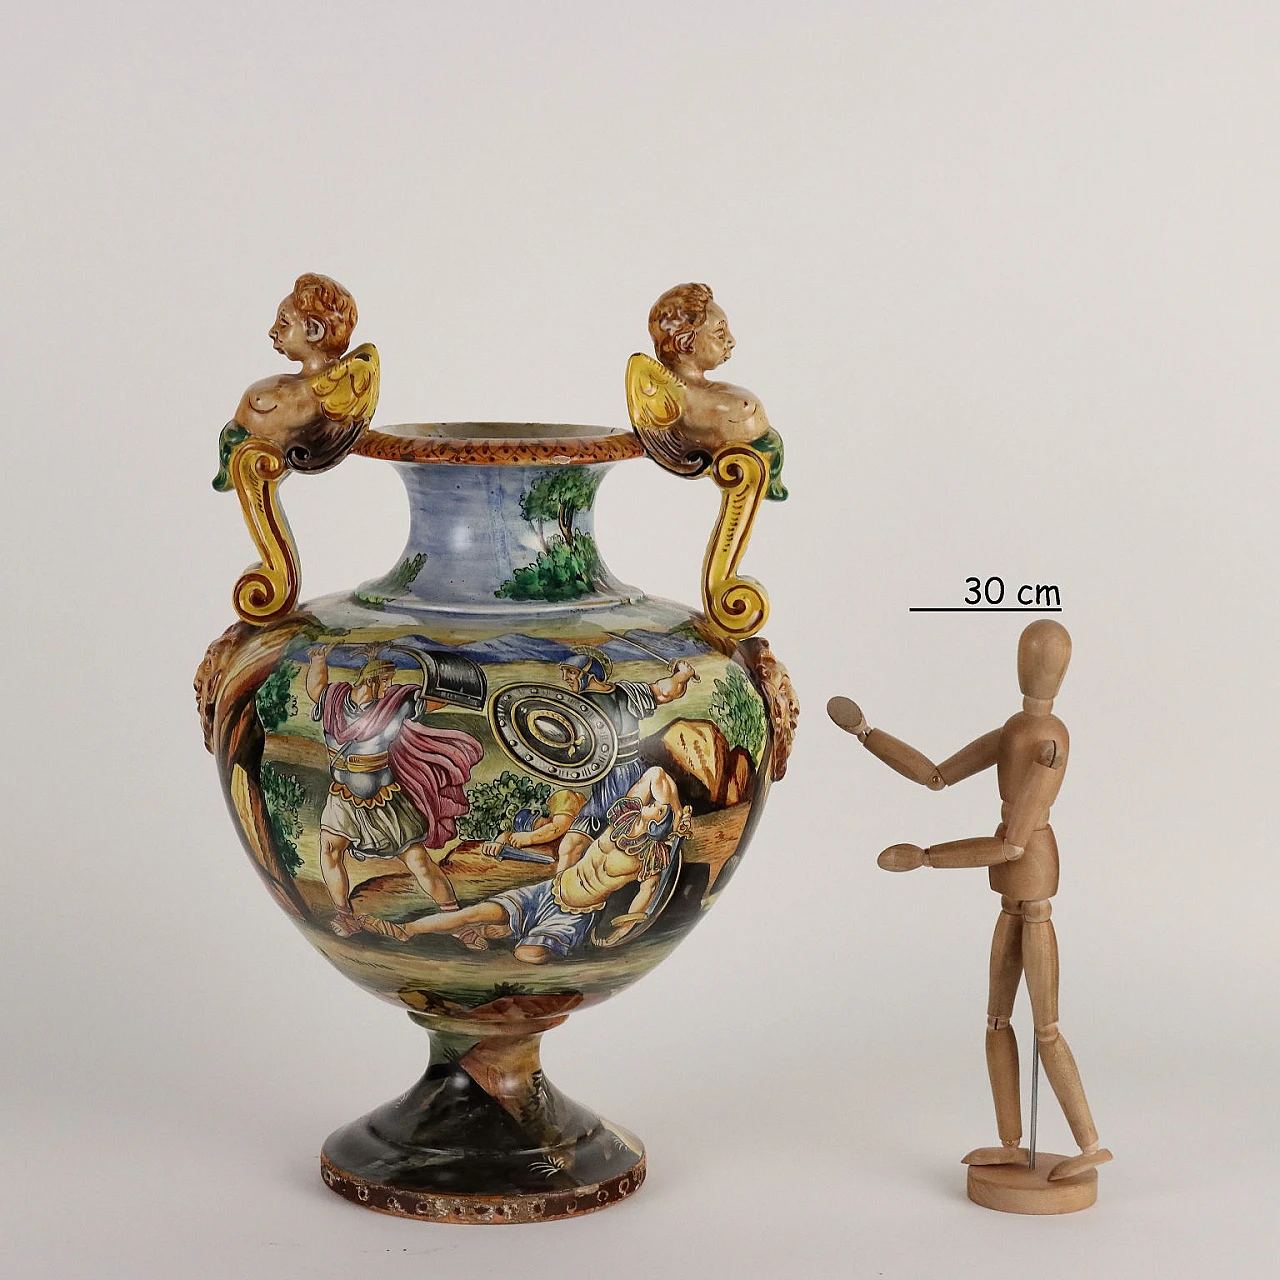 Painted majolica vase with winged figures and masks 2